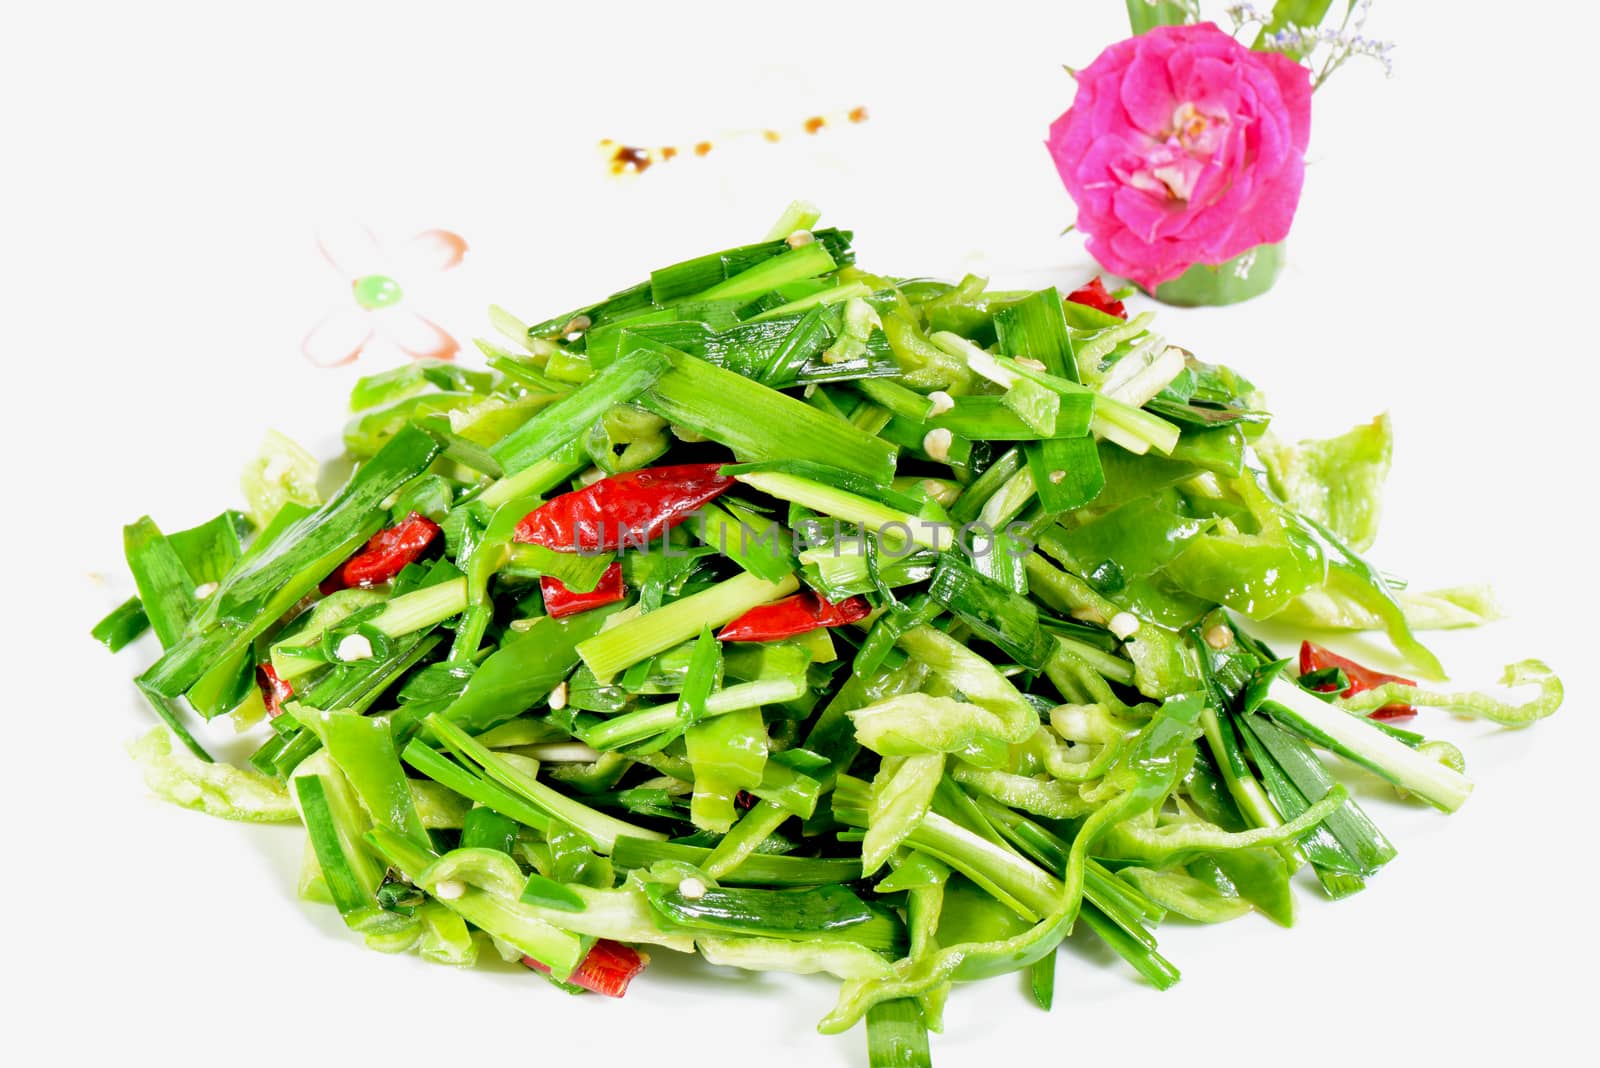 Chinese Food: Fried leek vegetable in a white plate